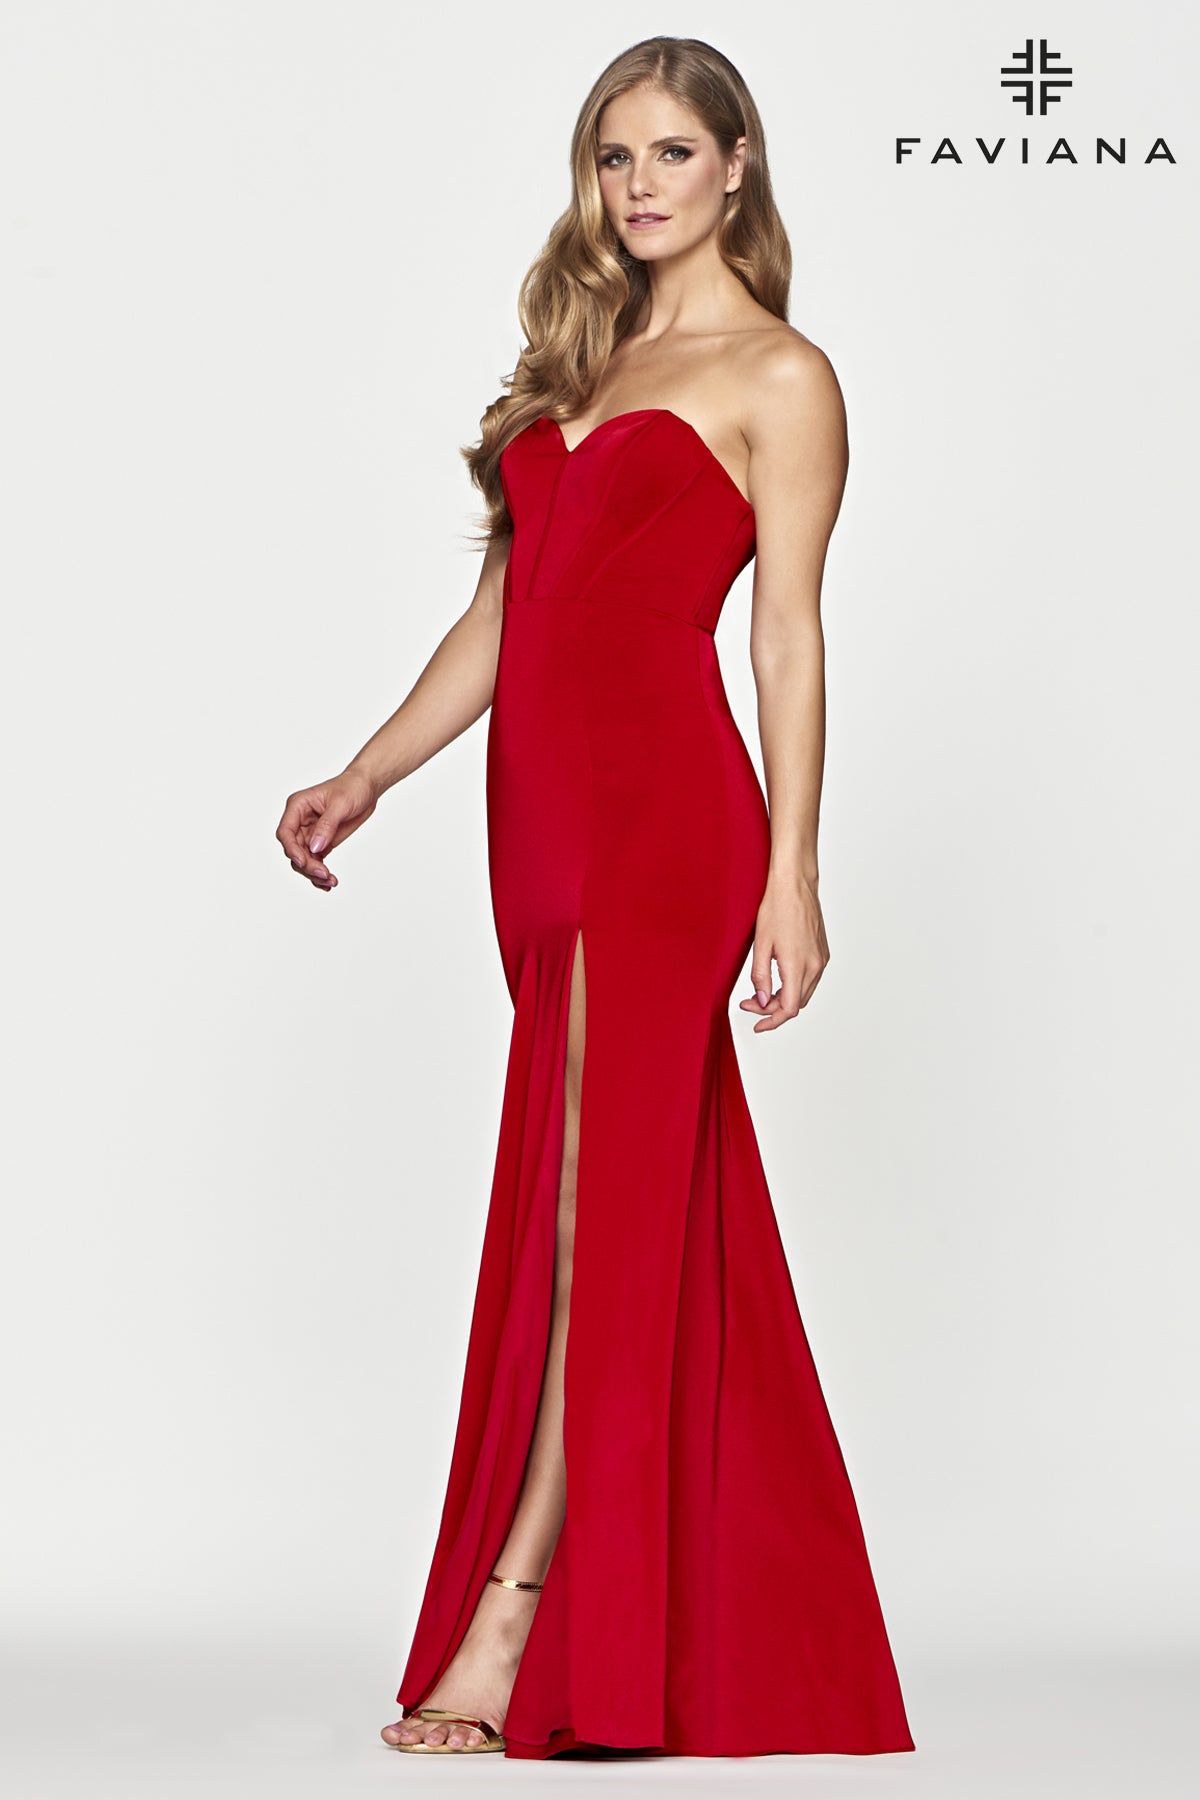 Faviana S10660 Corset Style Strapless Gown With Leg Slit | Red